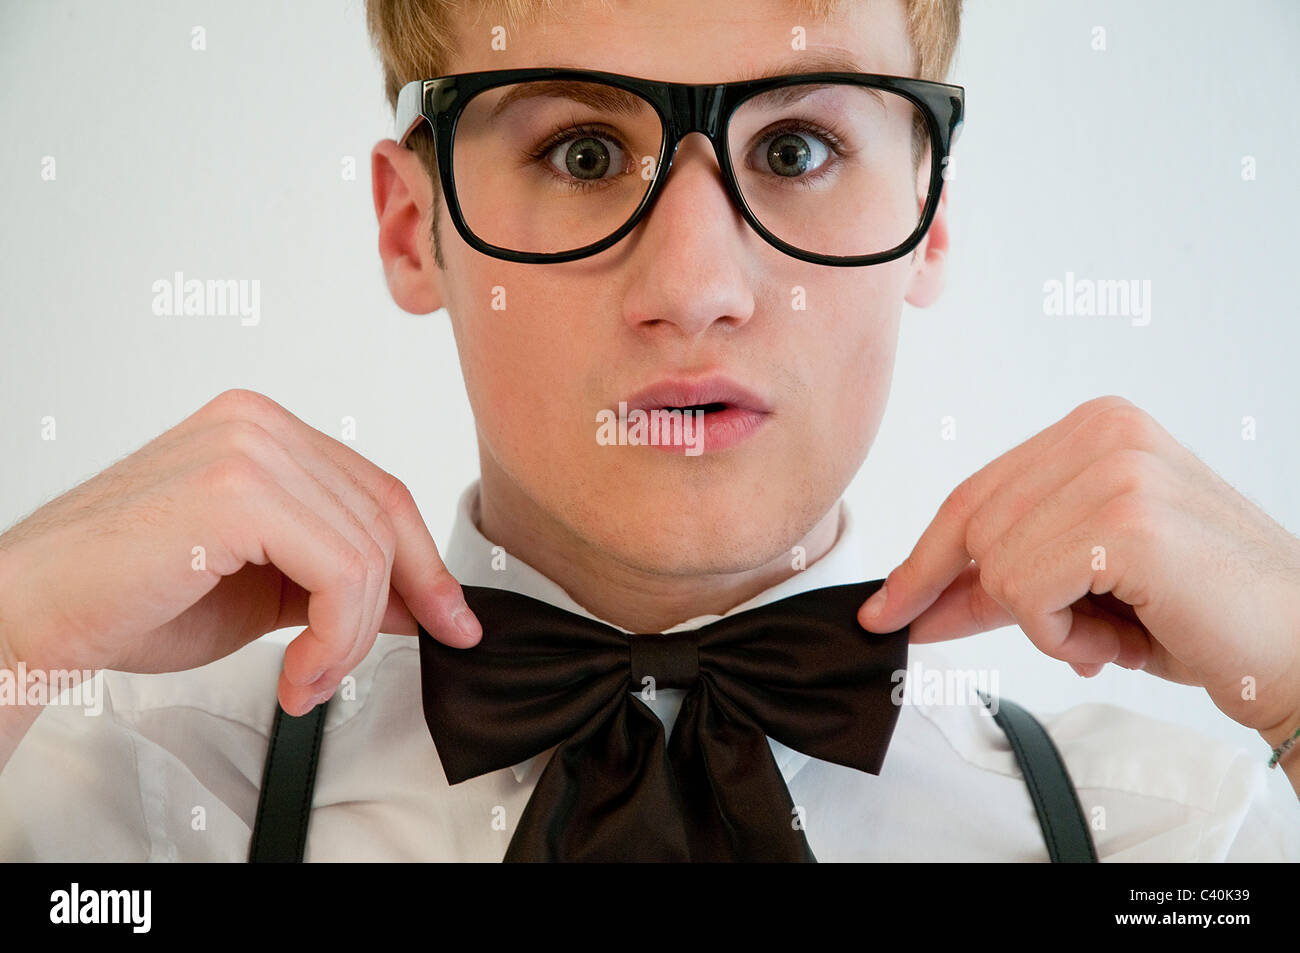 Young man wearing spectacles and bow tie. Close view. Stock Photo